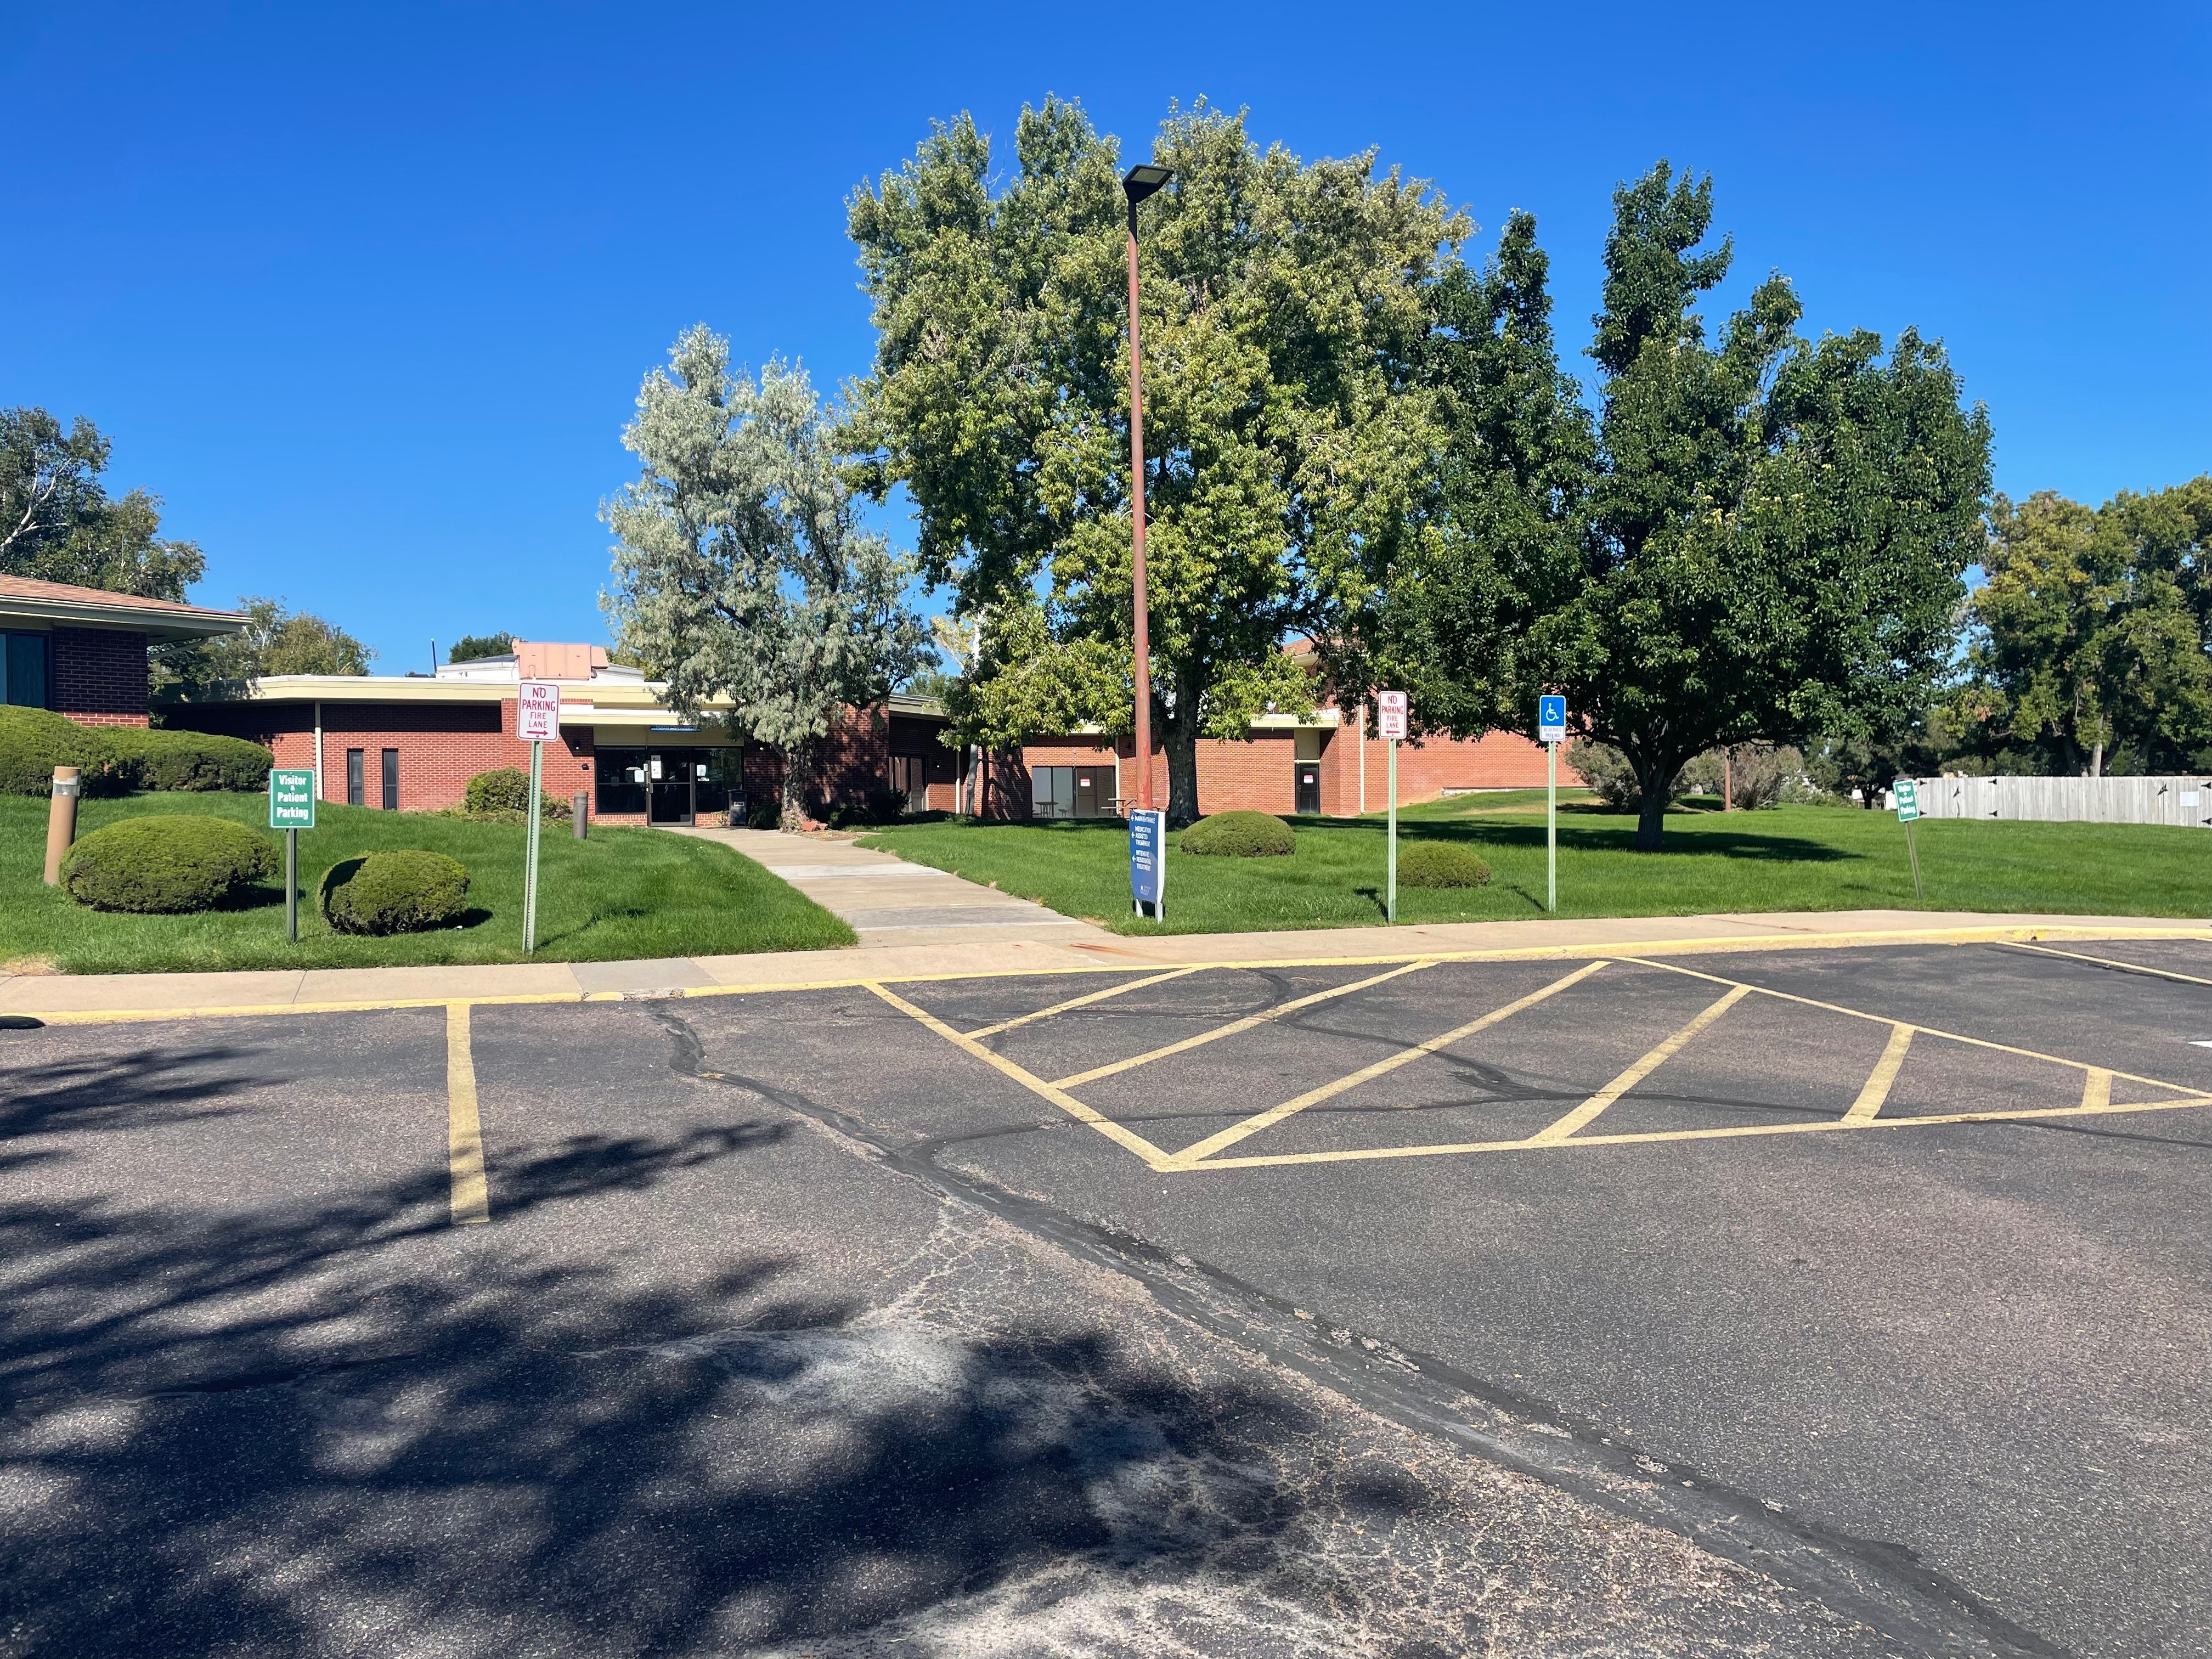 
District Attorney, Community Reach Center, Thornton Police Chief Secure Approval for a Youth Shelter to Safeguard Youth in Crisis in Adams County